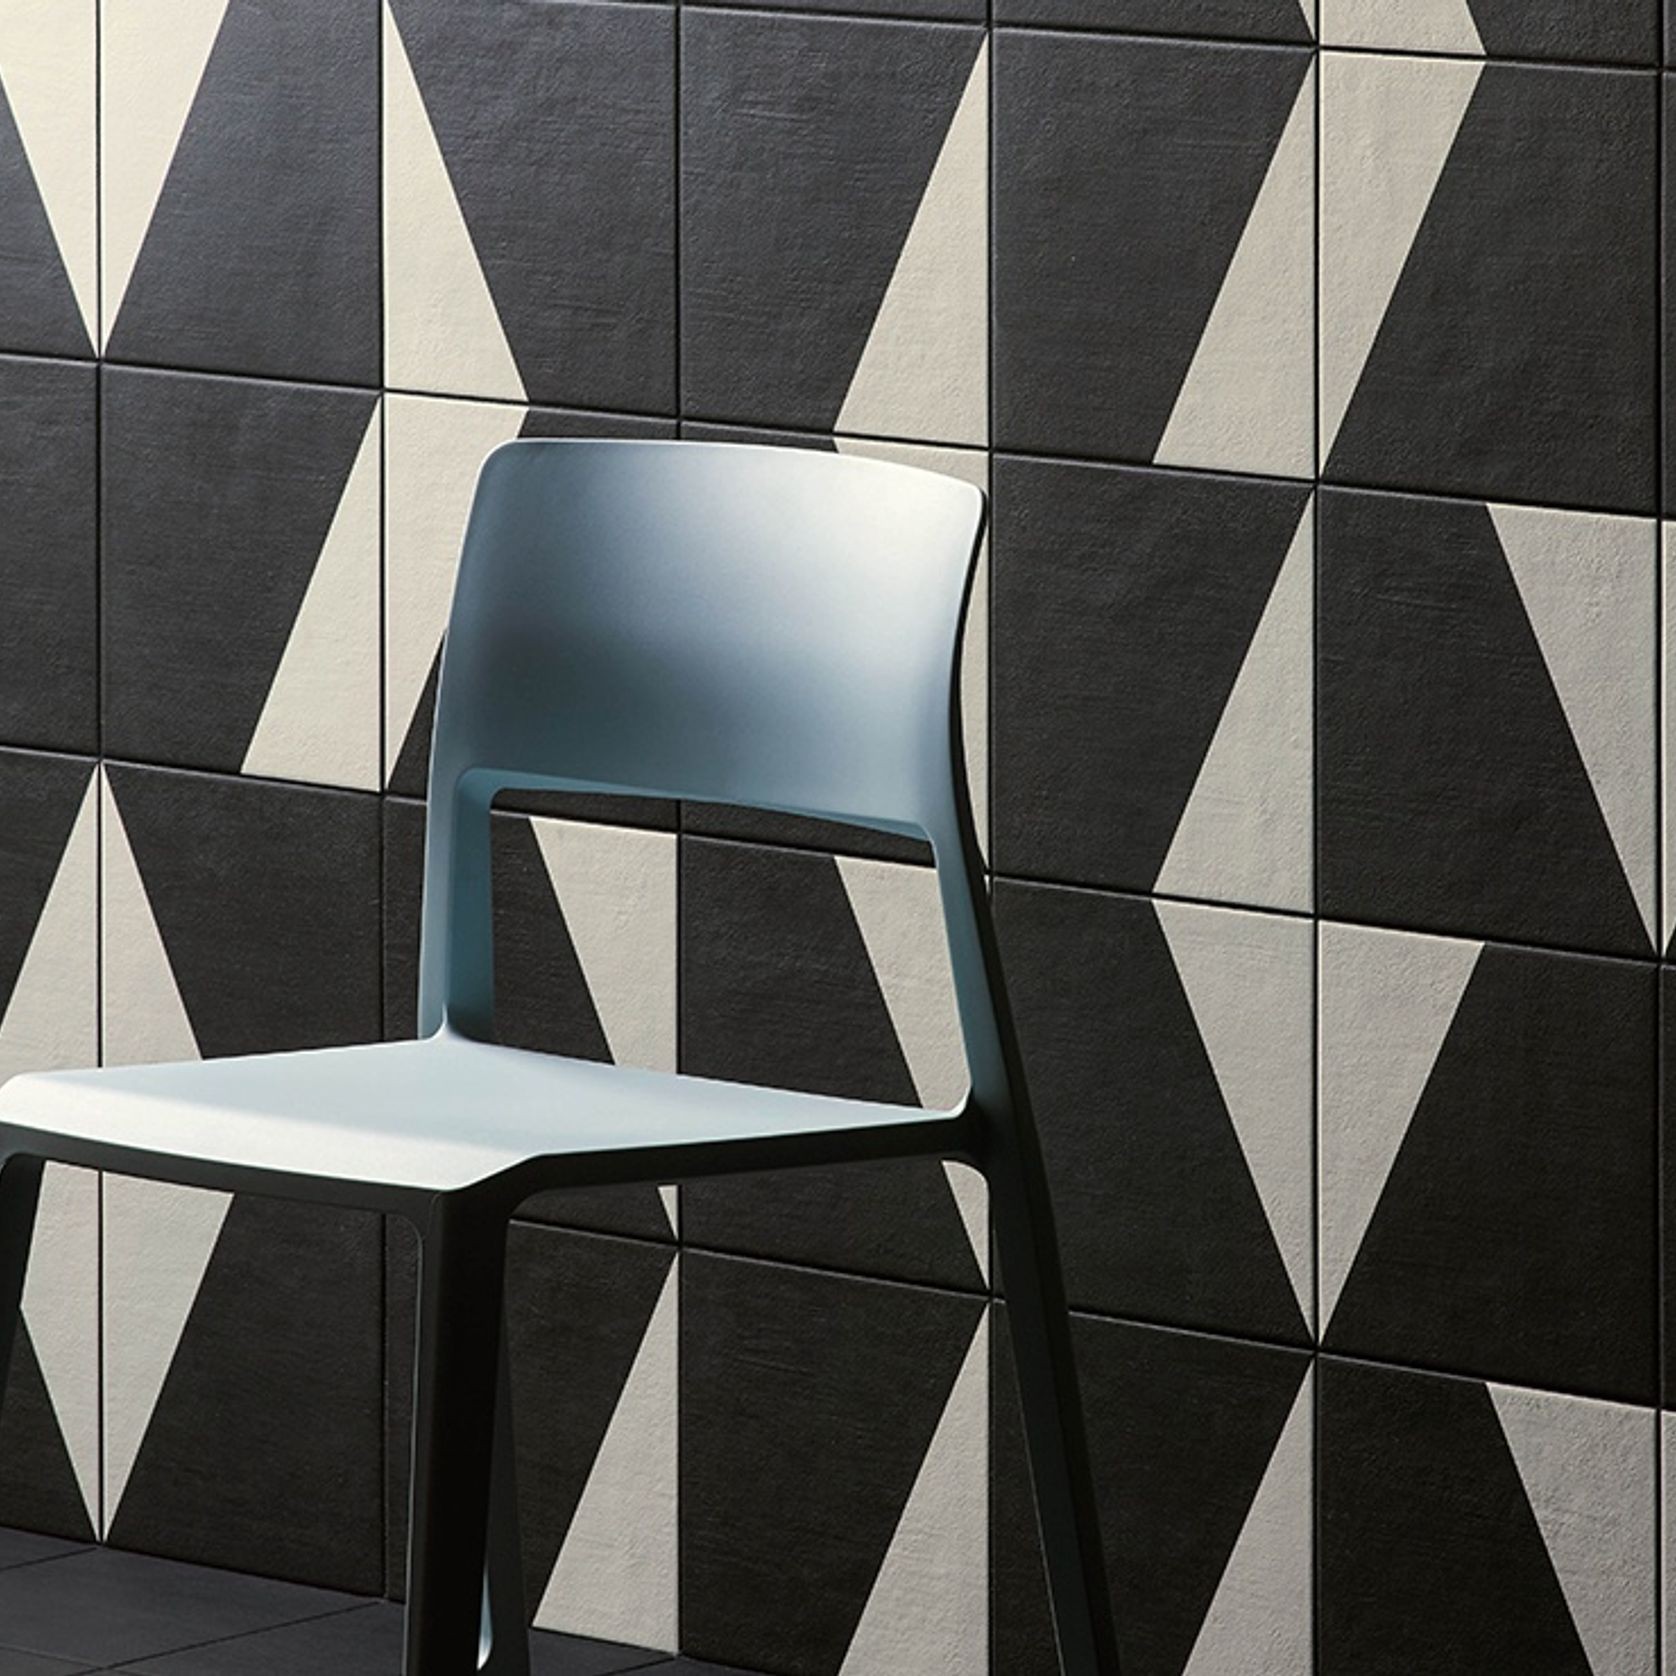 Mutina Puzzle Tile gallery detail image